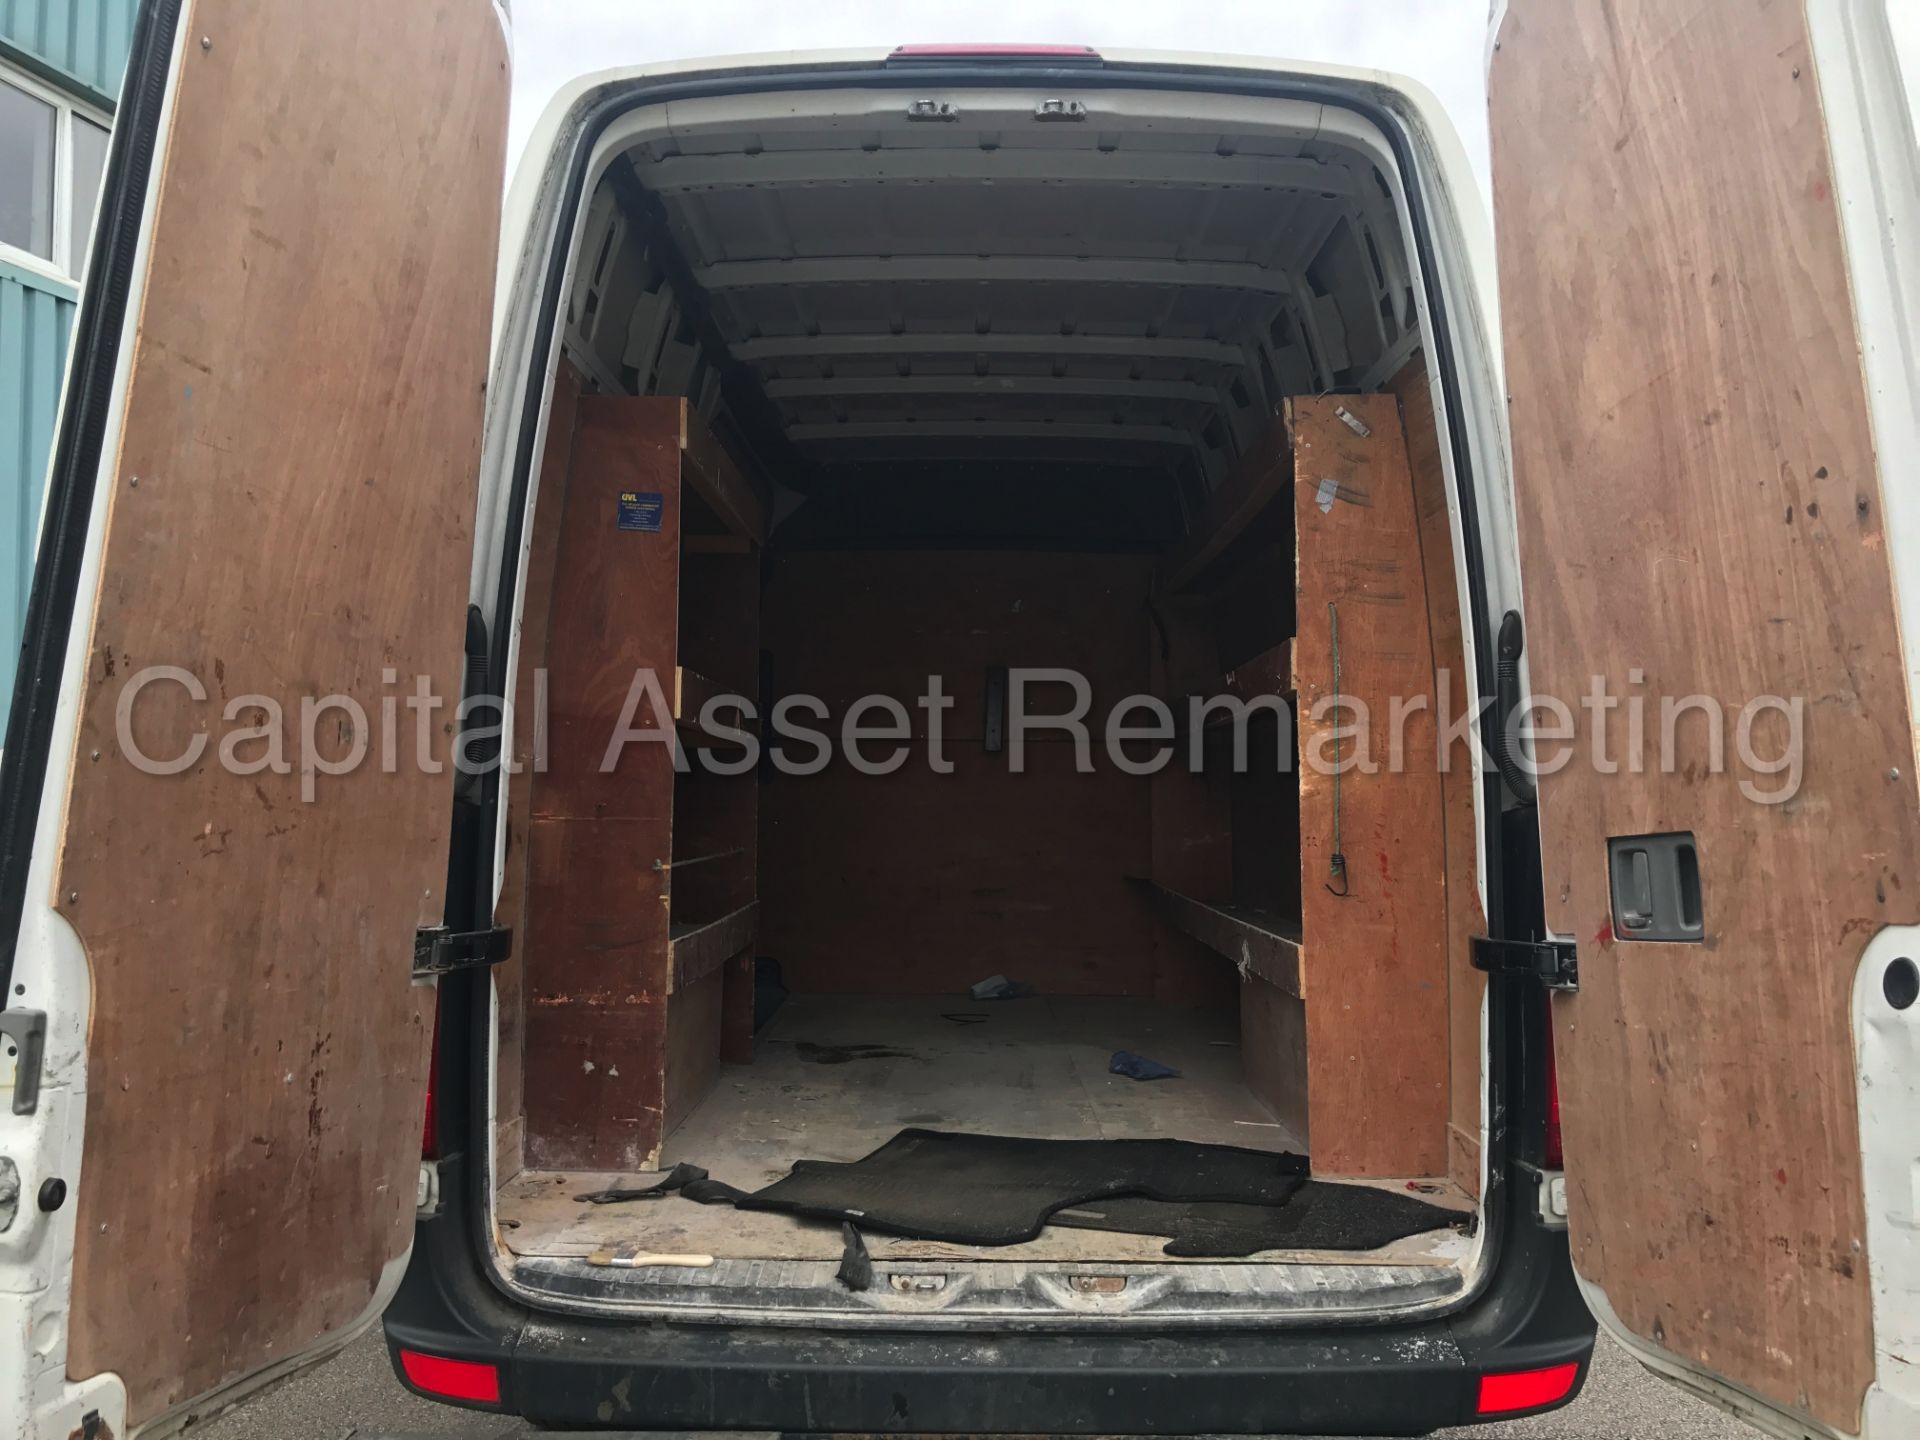 VOLKSWAGEN CRAFTER CR35 'MWB HI-ROOF' (2014) '2.0 TDI - 109 PS - 6 SPEED' *1 COMPANY OWNER FROM NEW* - Image 12 of 19